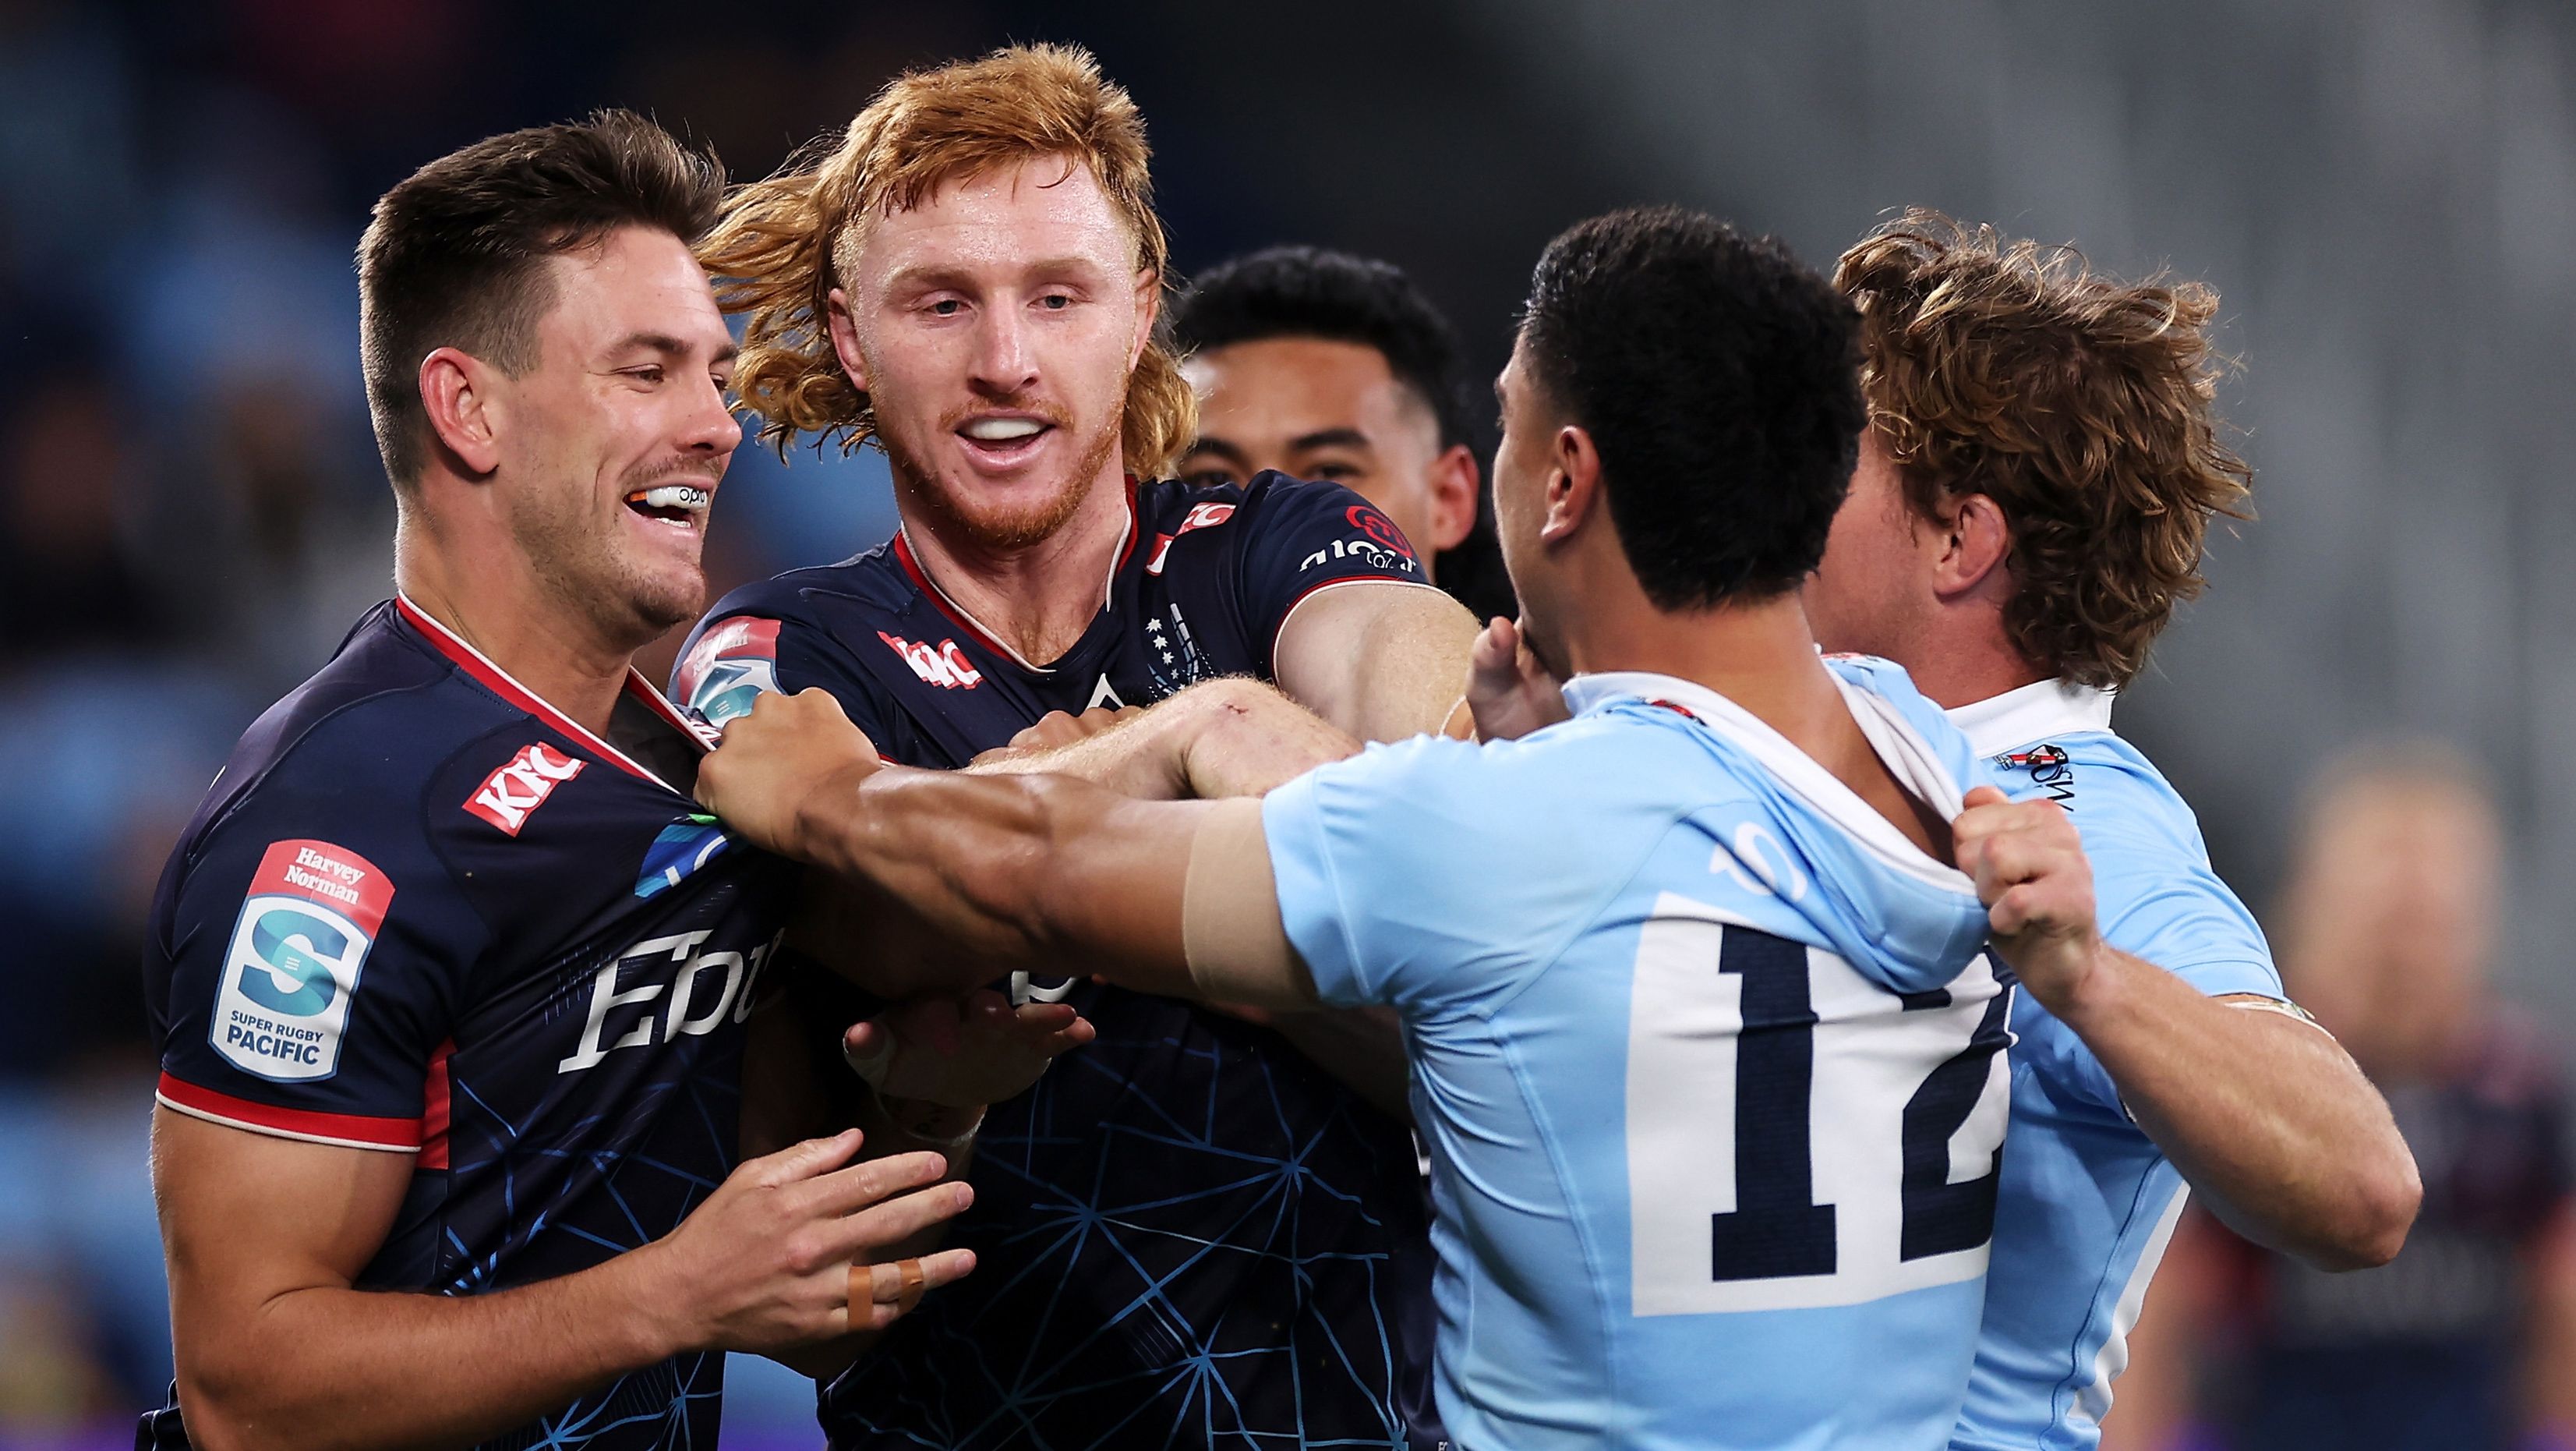 SYDNEY, AUSTRALIA - MAY 13: Lachie Anderson and Brad Wilkin of the Rebels scuffle with Lalakai Foketi and Michael Hooper of the Waratahs during the round 12 Super Rugby Pacific match between NSW Waratahs and Melbourne Rebels at Allianz Stadium, on May 13, 2023, in Sydney, Australia. (Photo by Mark Kolbe/Getty Images)